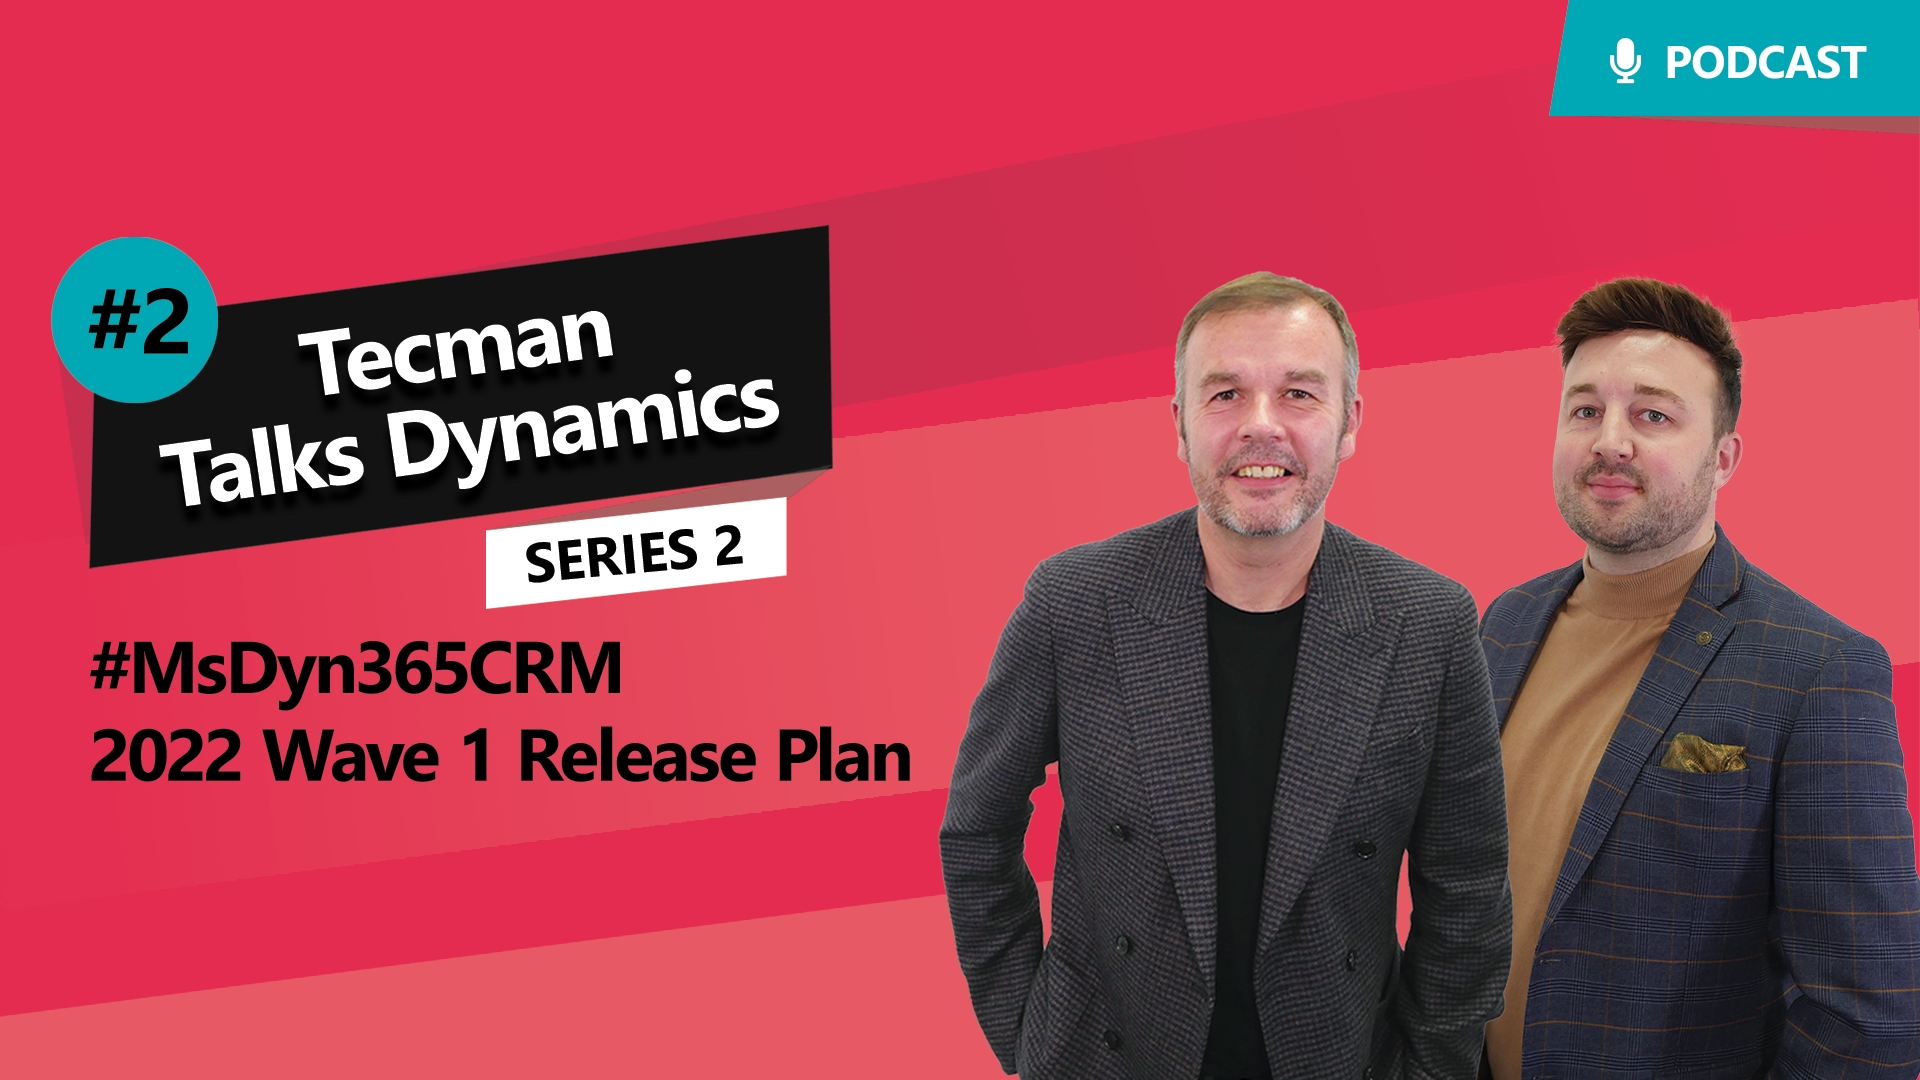 Explore the exciting new features for Microsoft Dynamics 365 Sales, Marketing & Customer Service in the Wave 1 2022 Release Plan!